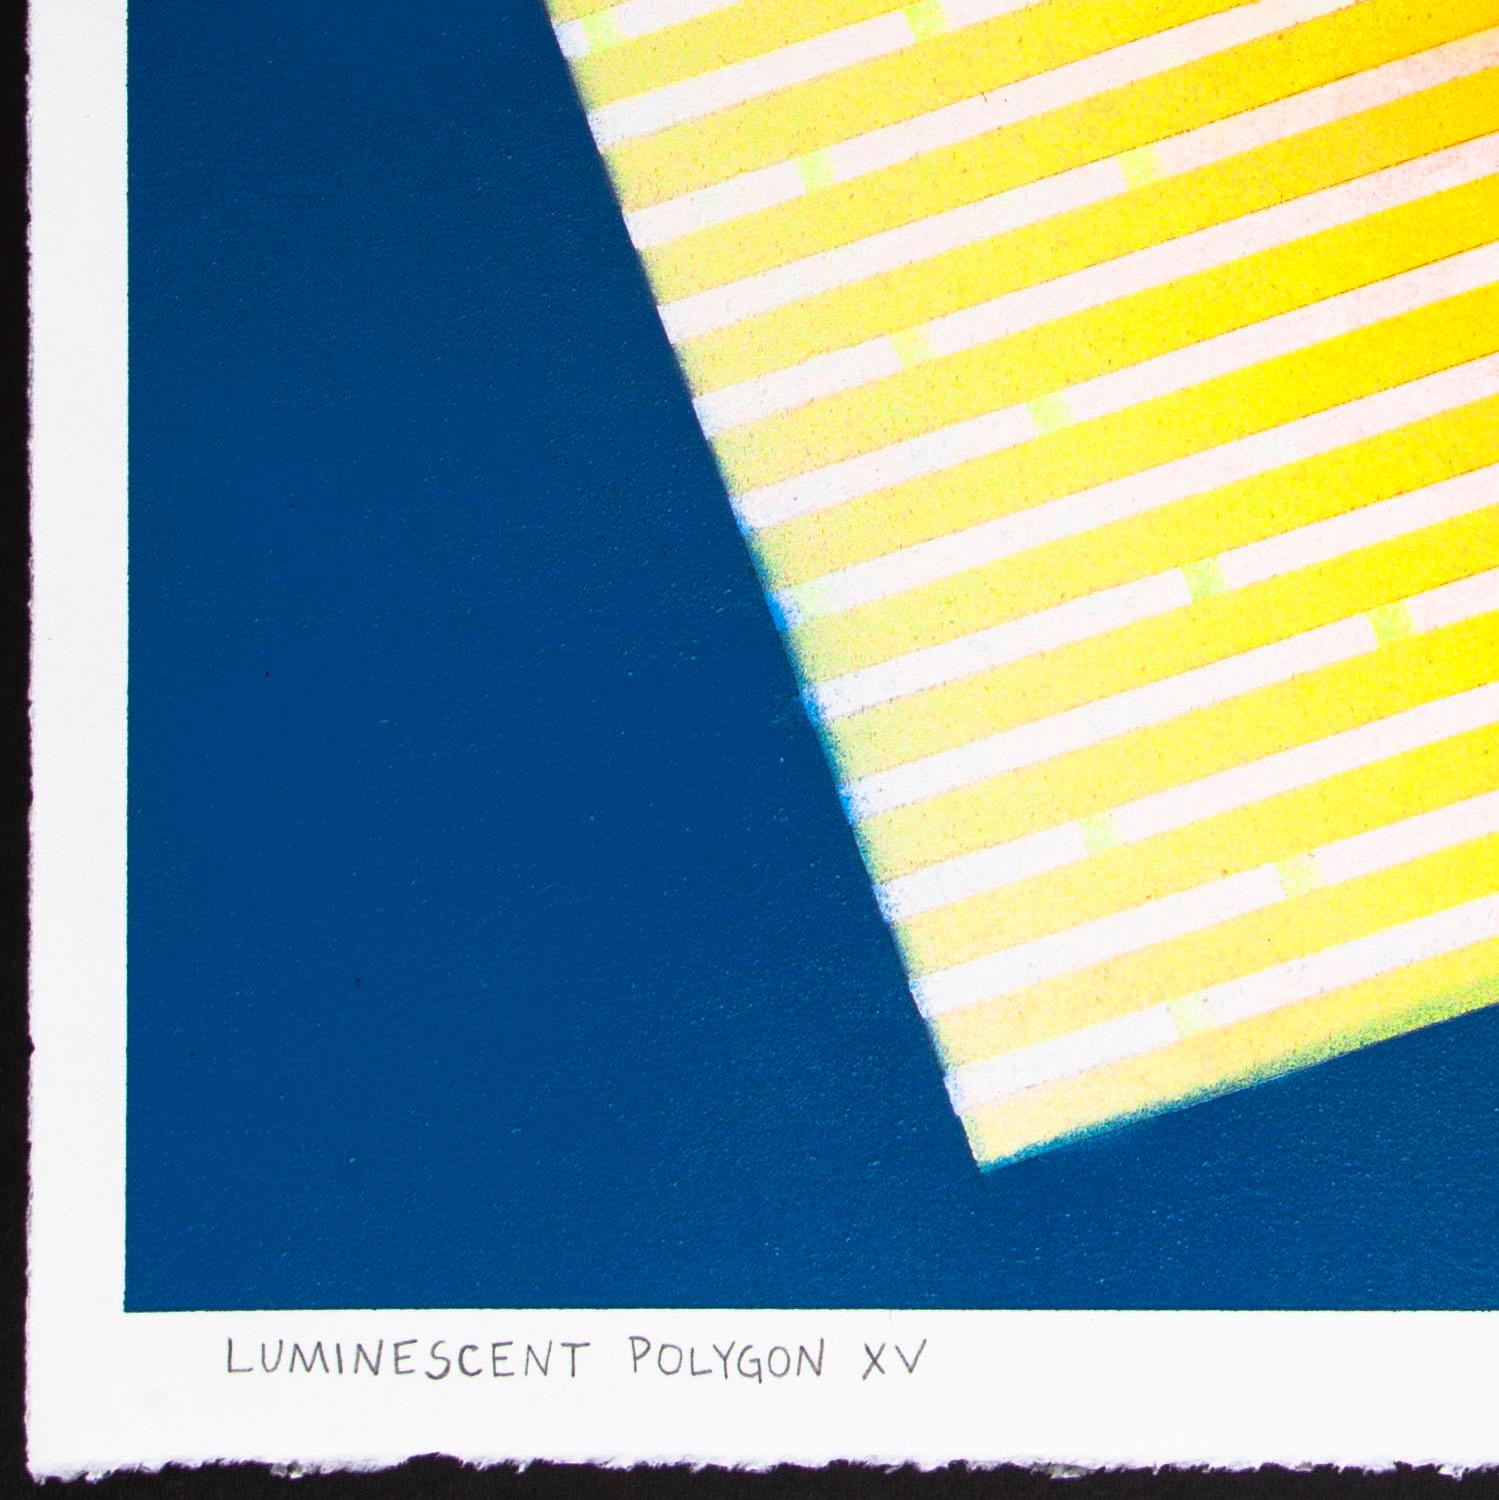 Luminescent Polygon XV: geometric abstract painting; yellow & blue line patterns For Sale 1